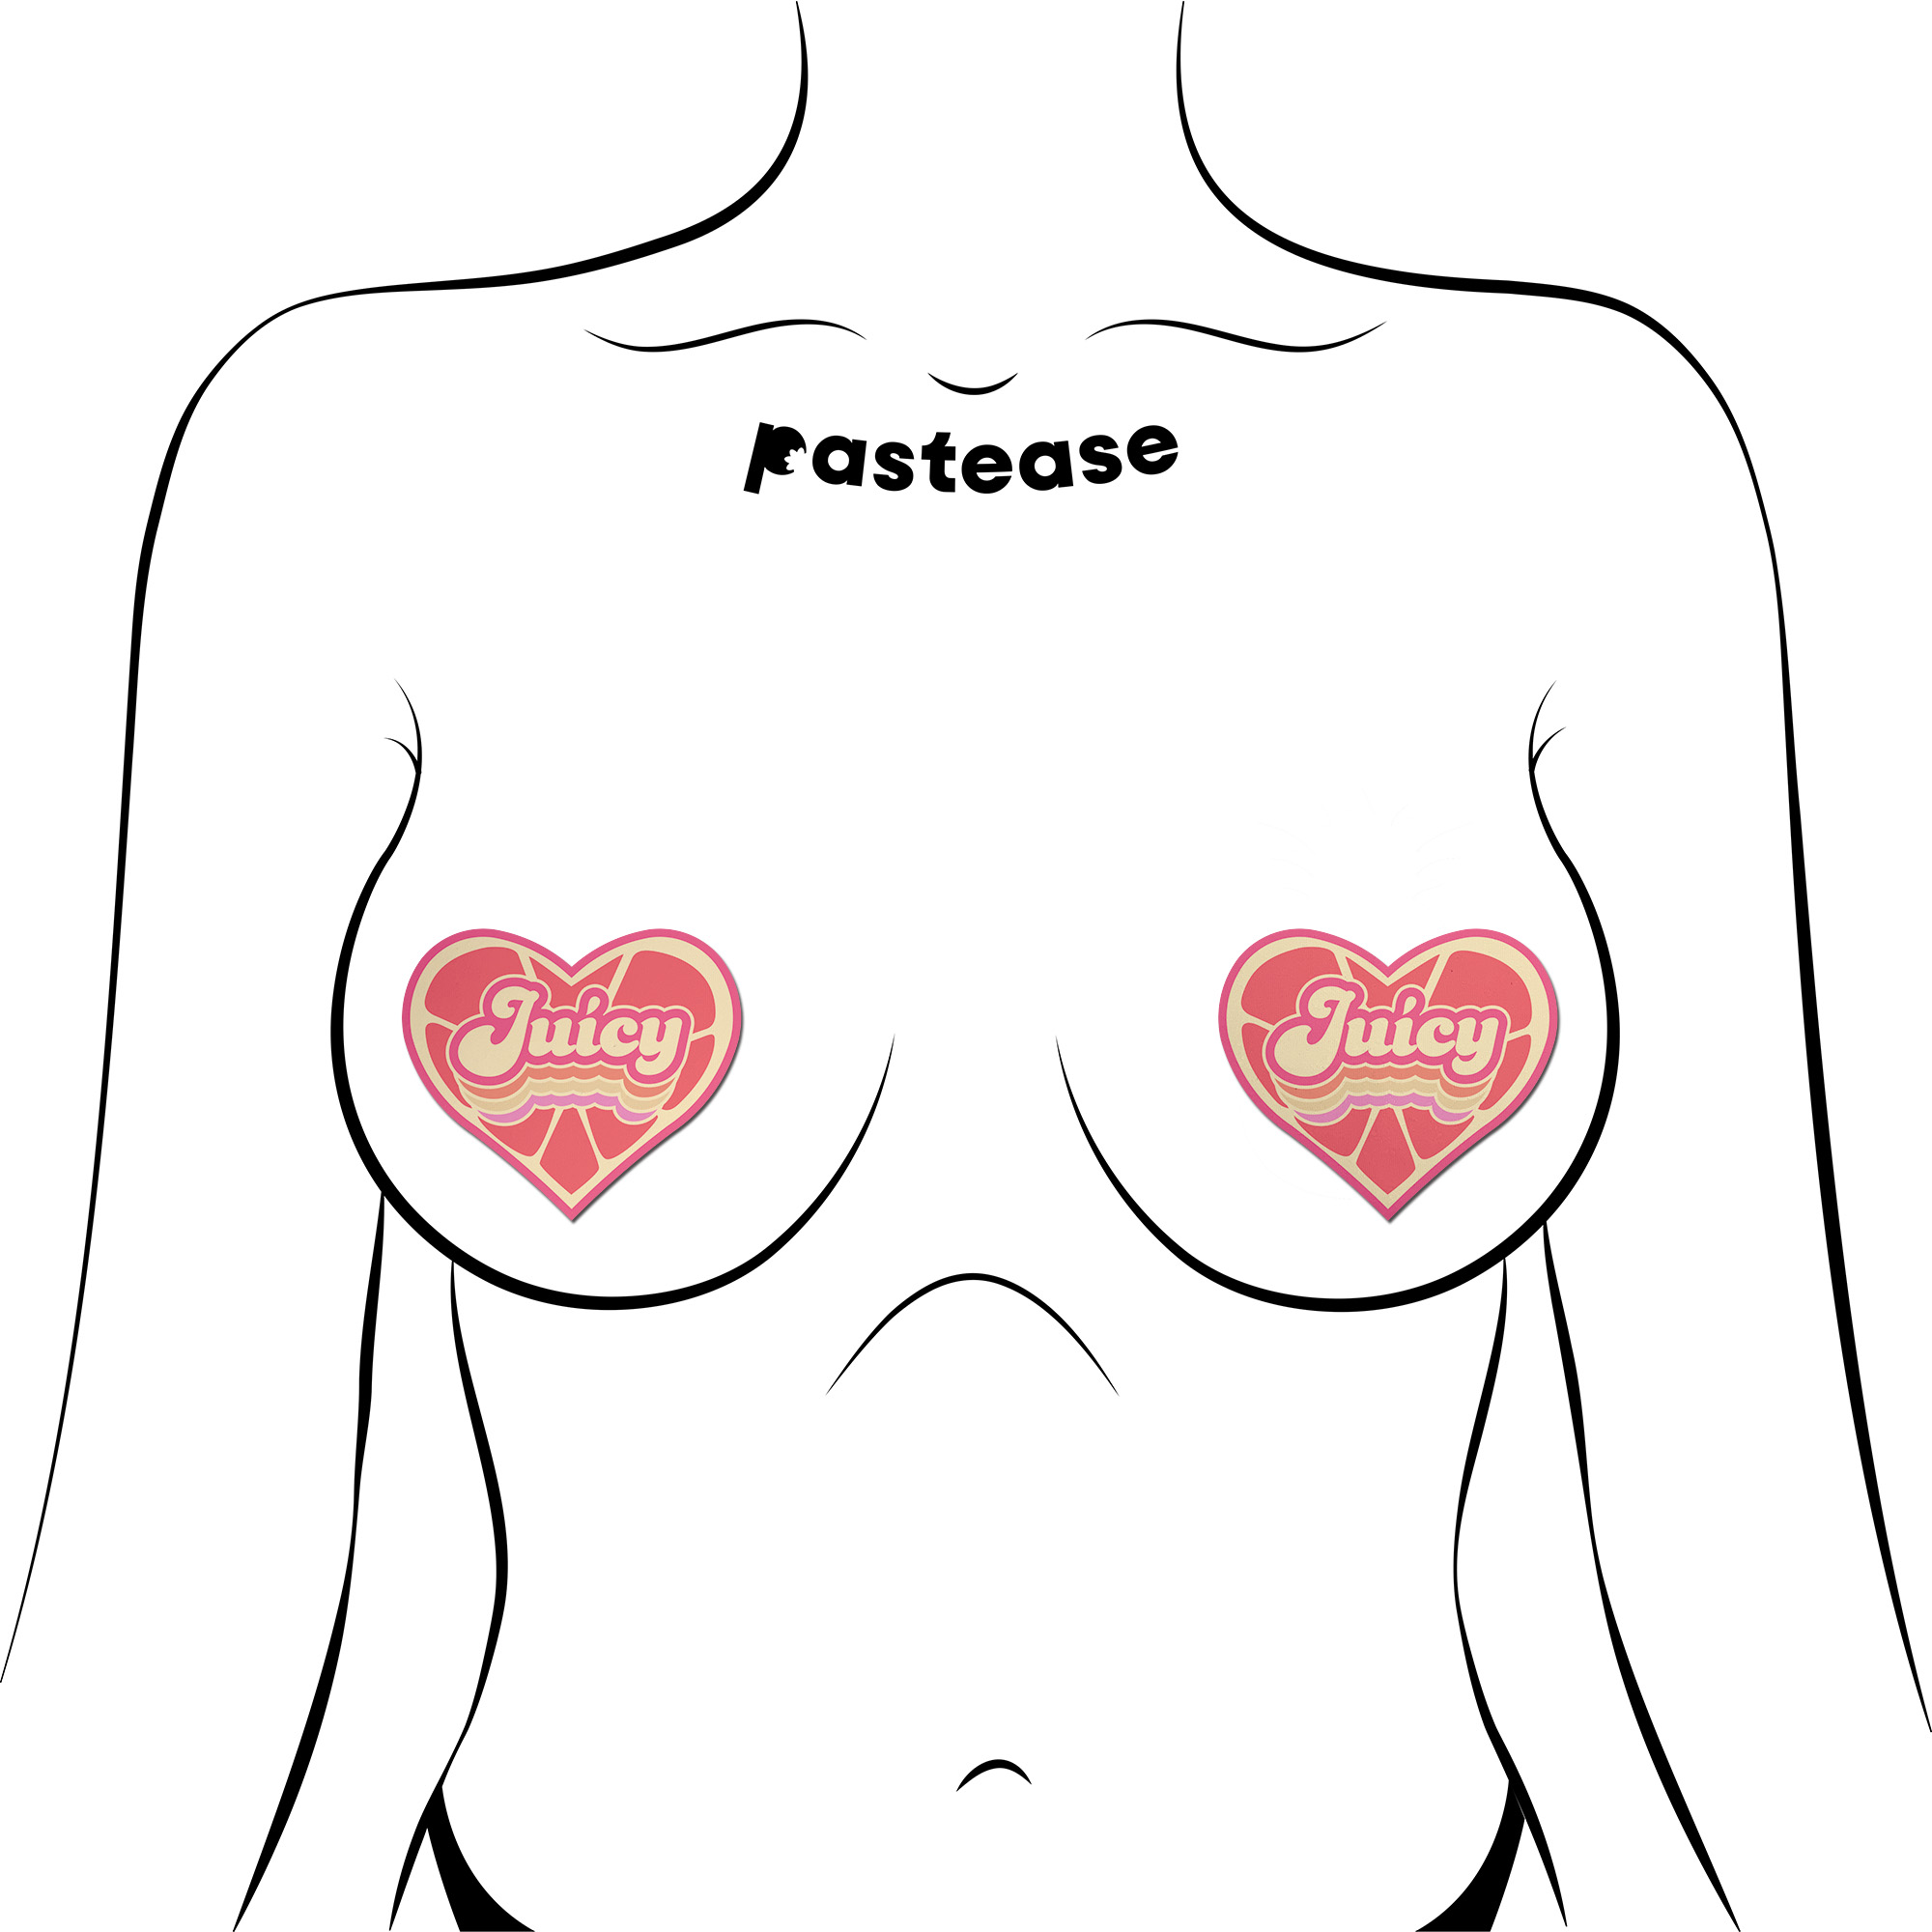 5 Pack: Love: 'Juicy' Pink Grapefruit Retro Heart Pasties Affirmations by Pastease